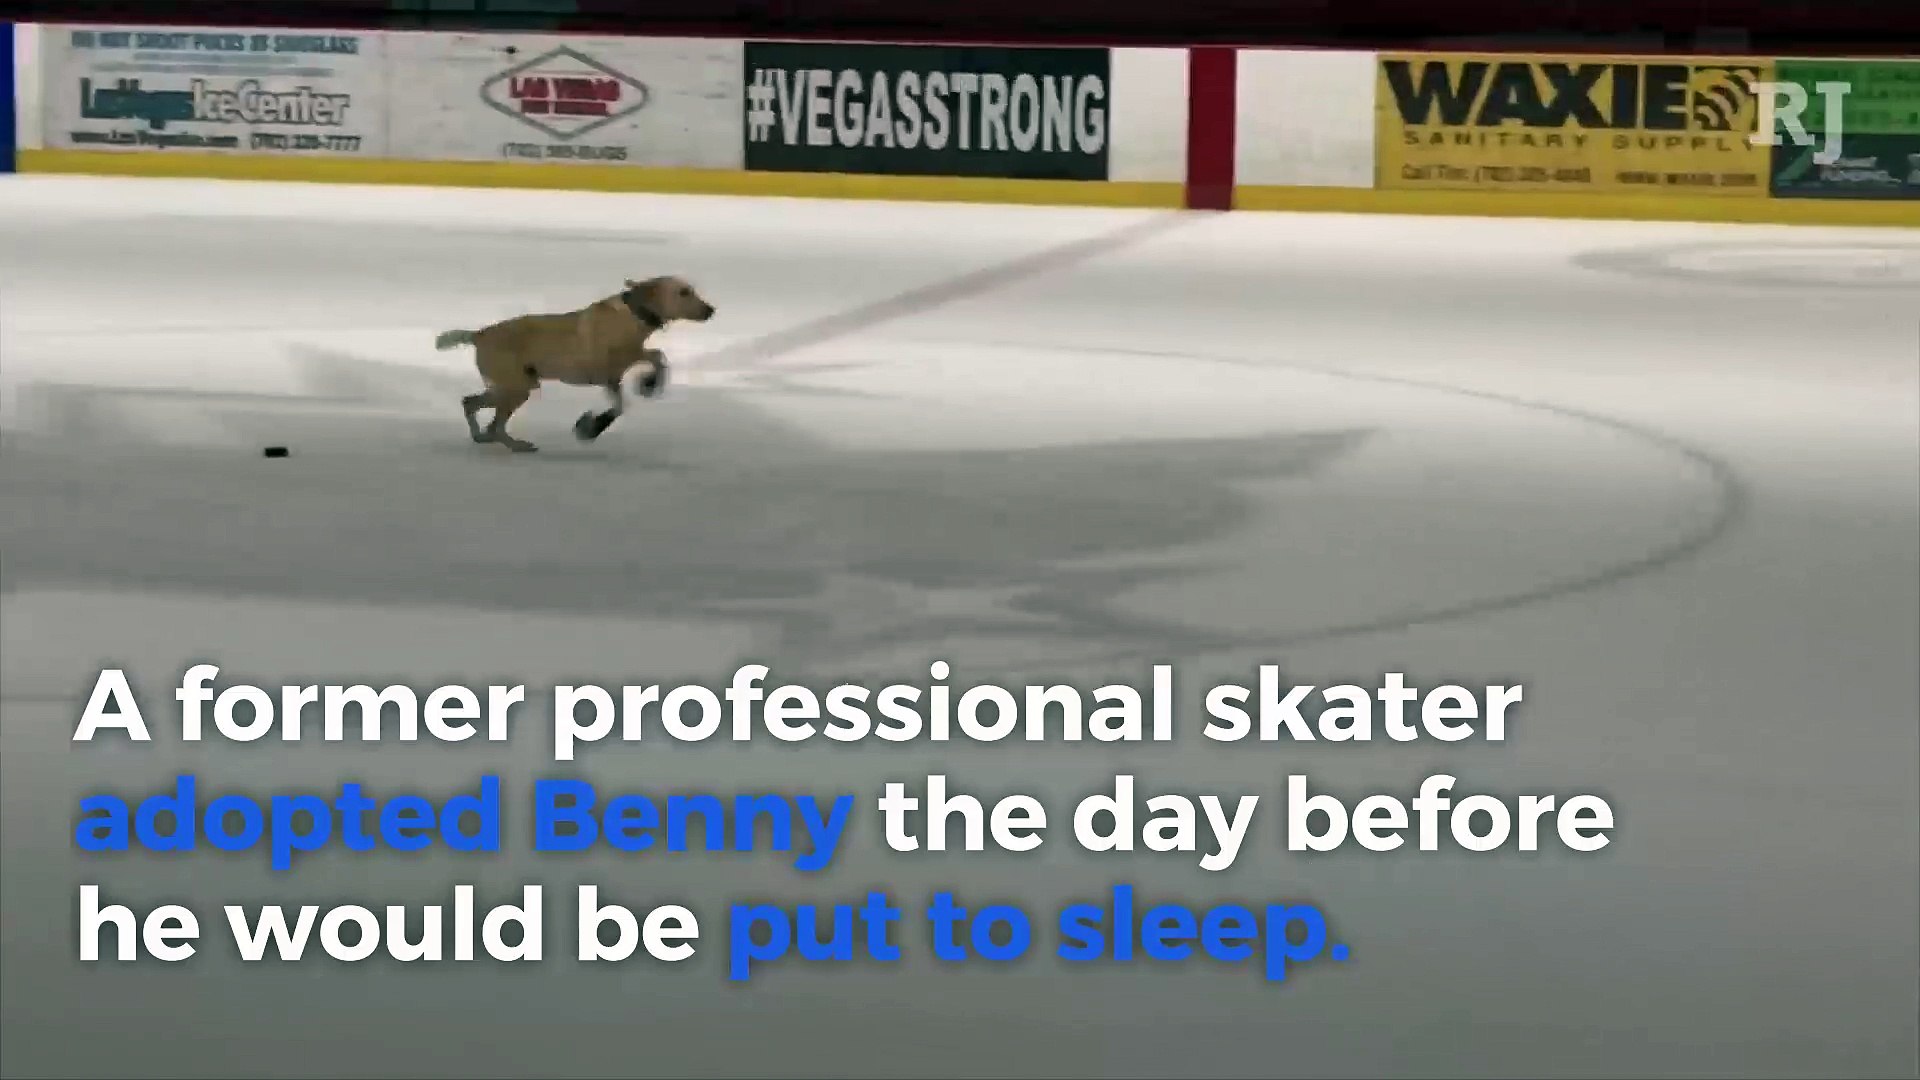 GOTTA SEE IT: Dog On Skates Puts On A Show At Golden Knights And